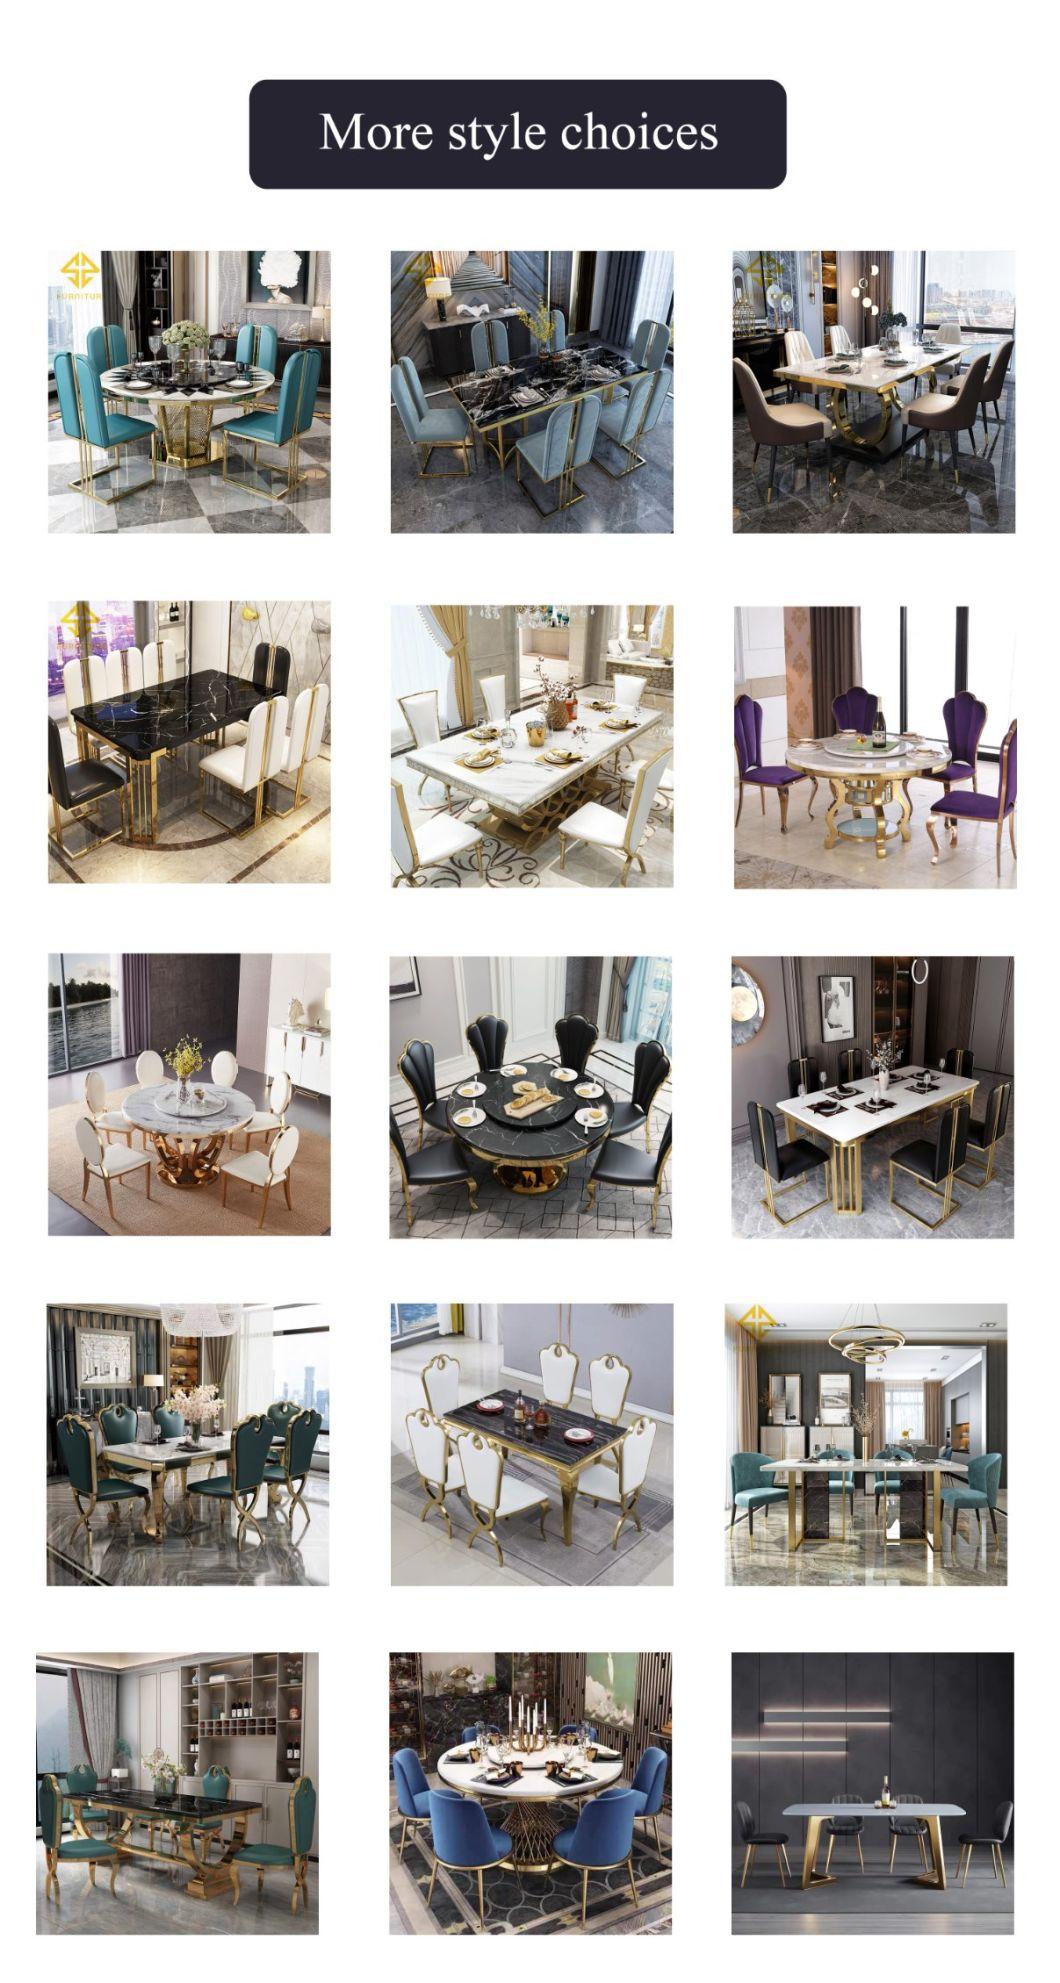 Morden Luxury Design Marble Top Dining 4 Chairs Table Set Dining Room Furniture Table and Chairs for Dining Room